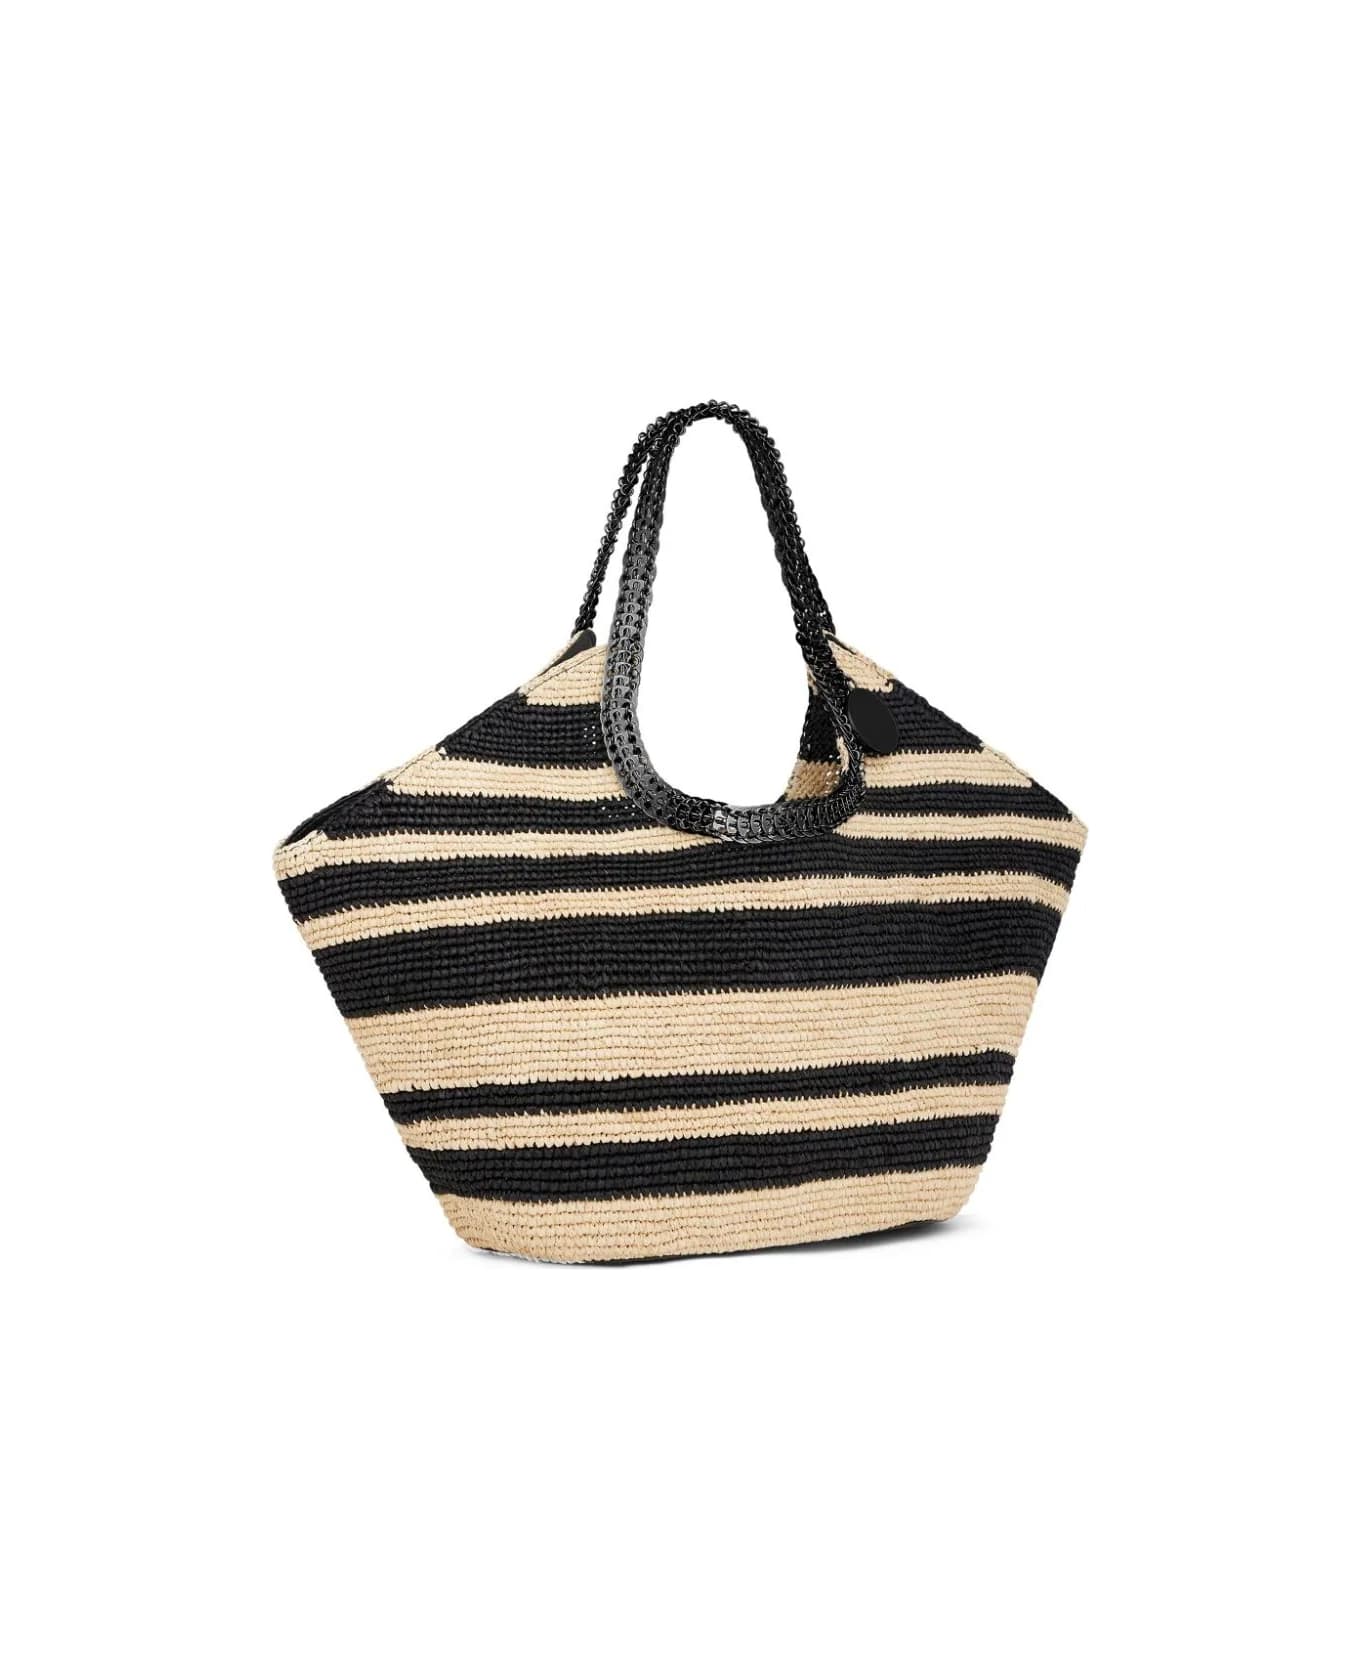 Paco Rabanne Striped Raffia Tote Bag With 1969 Discs Details - Brown